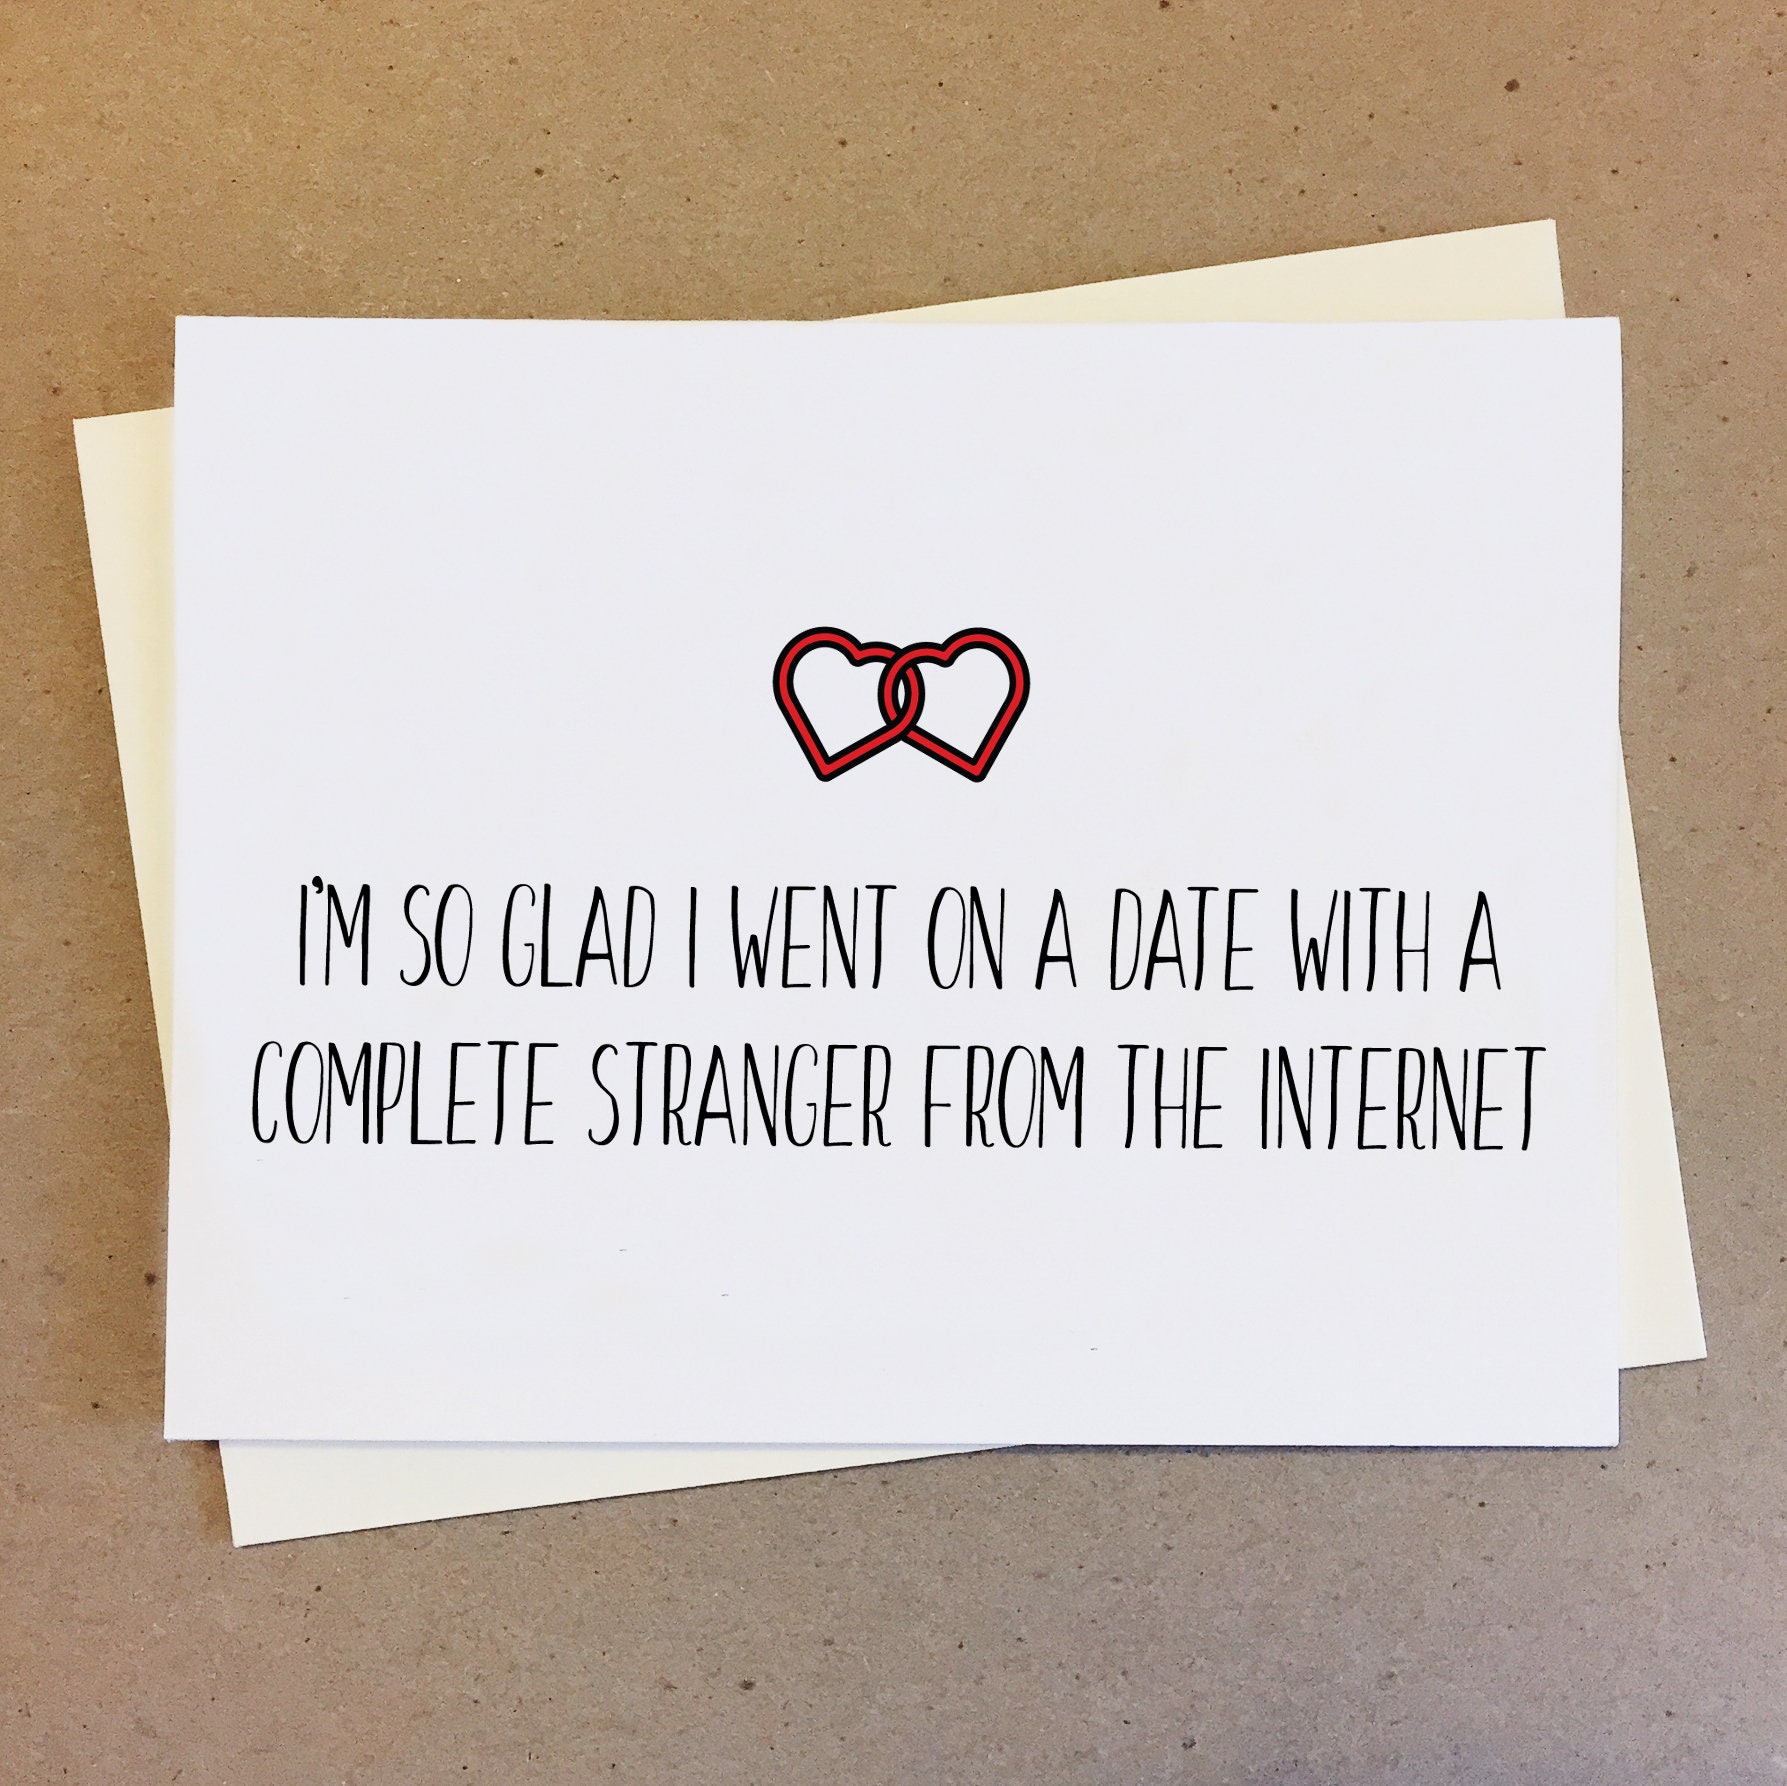 I am so glad that I went on a date with a complete stranger..